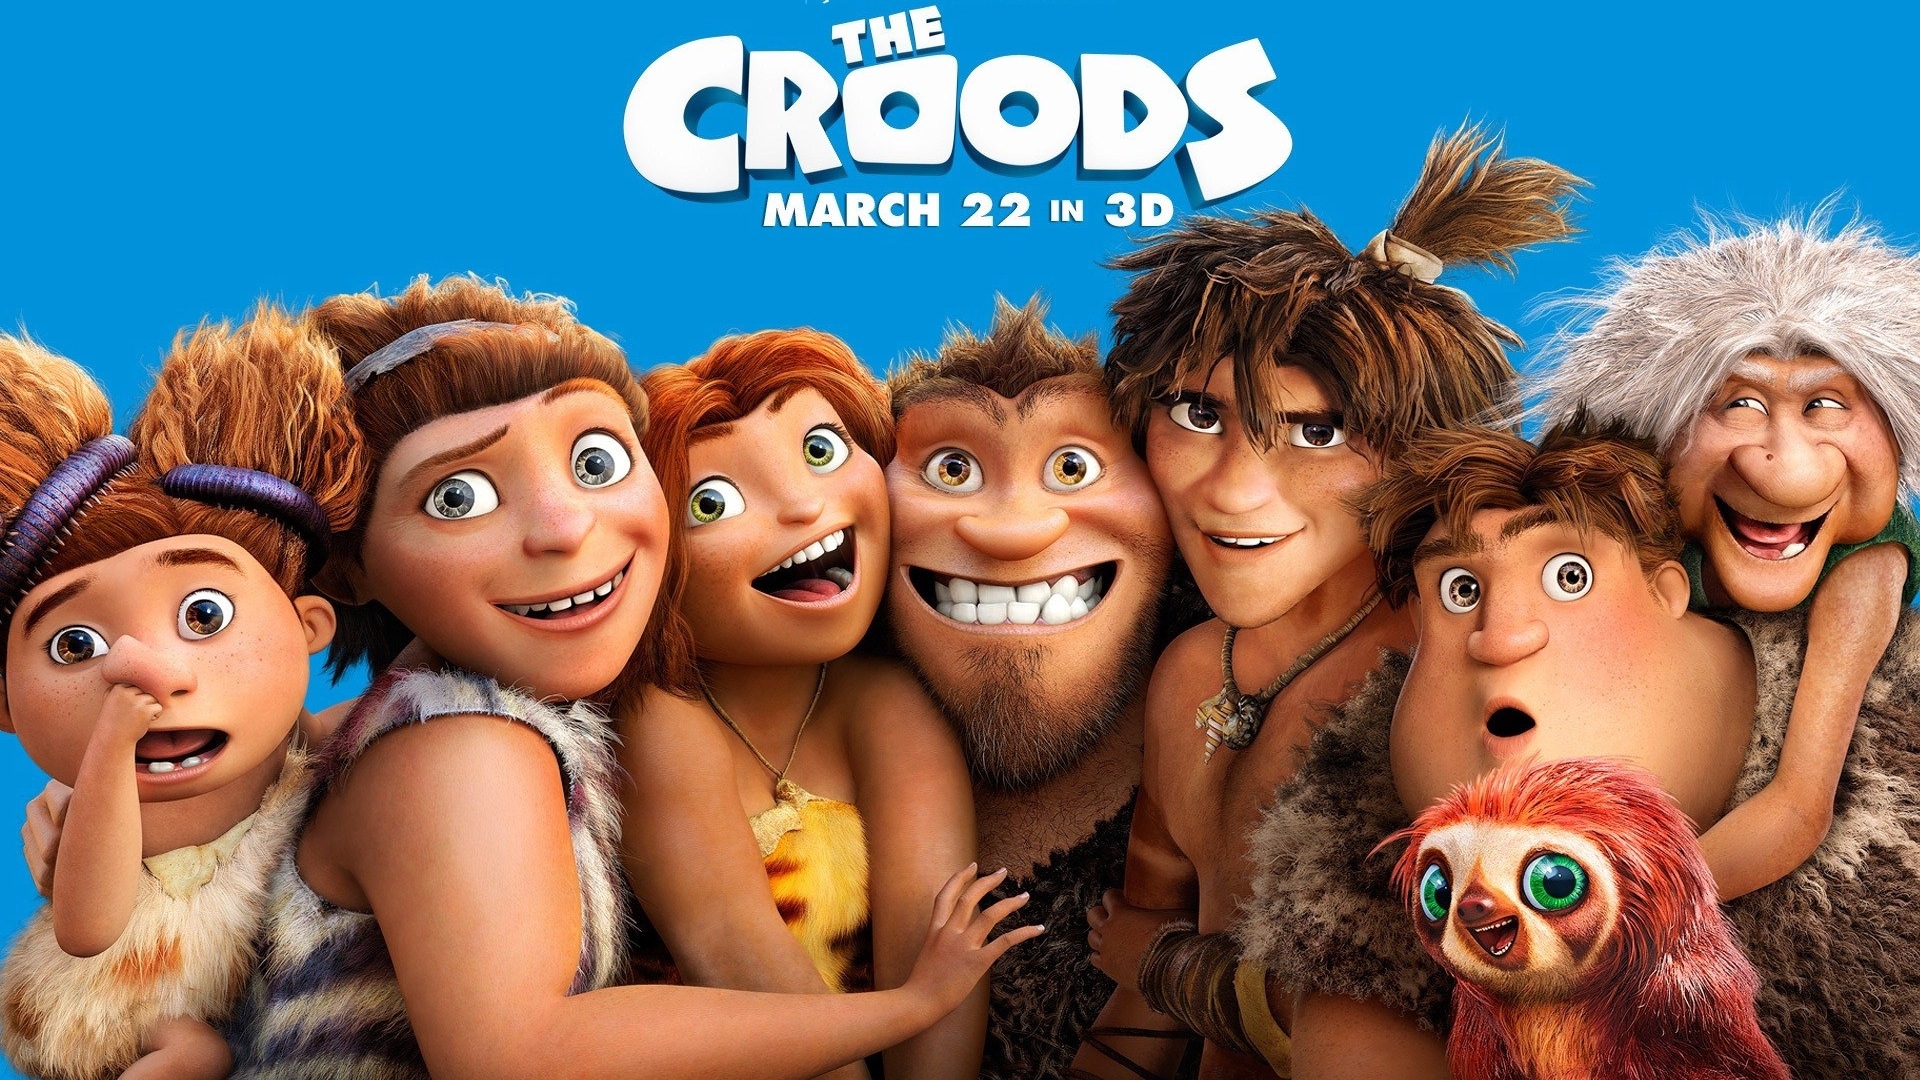 V Croods HD Movie Wallpapers #3 - 1920x1080